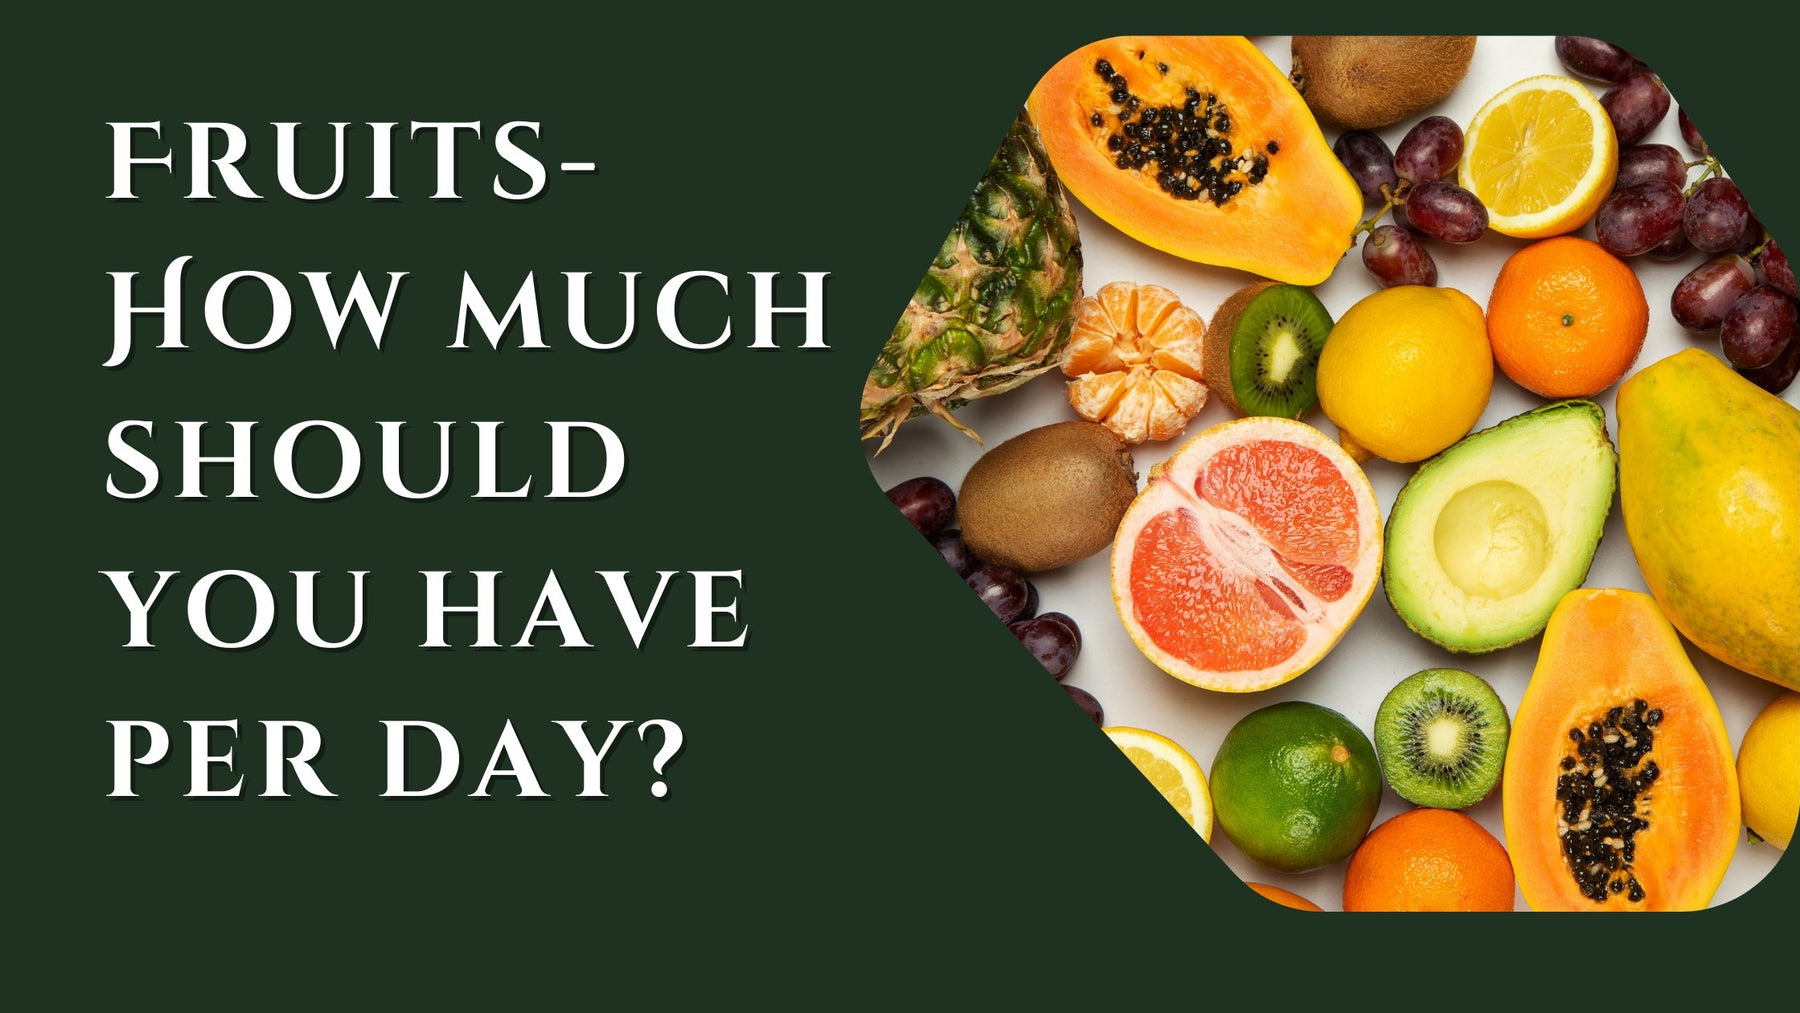 Fruits- How much should you have per day? - Roshni Sanghvi